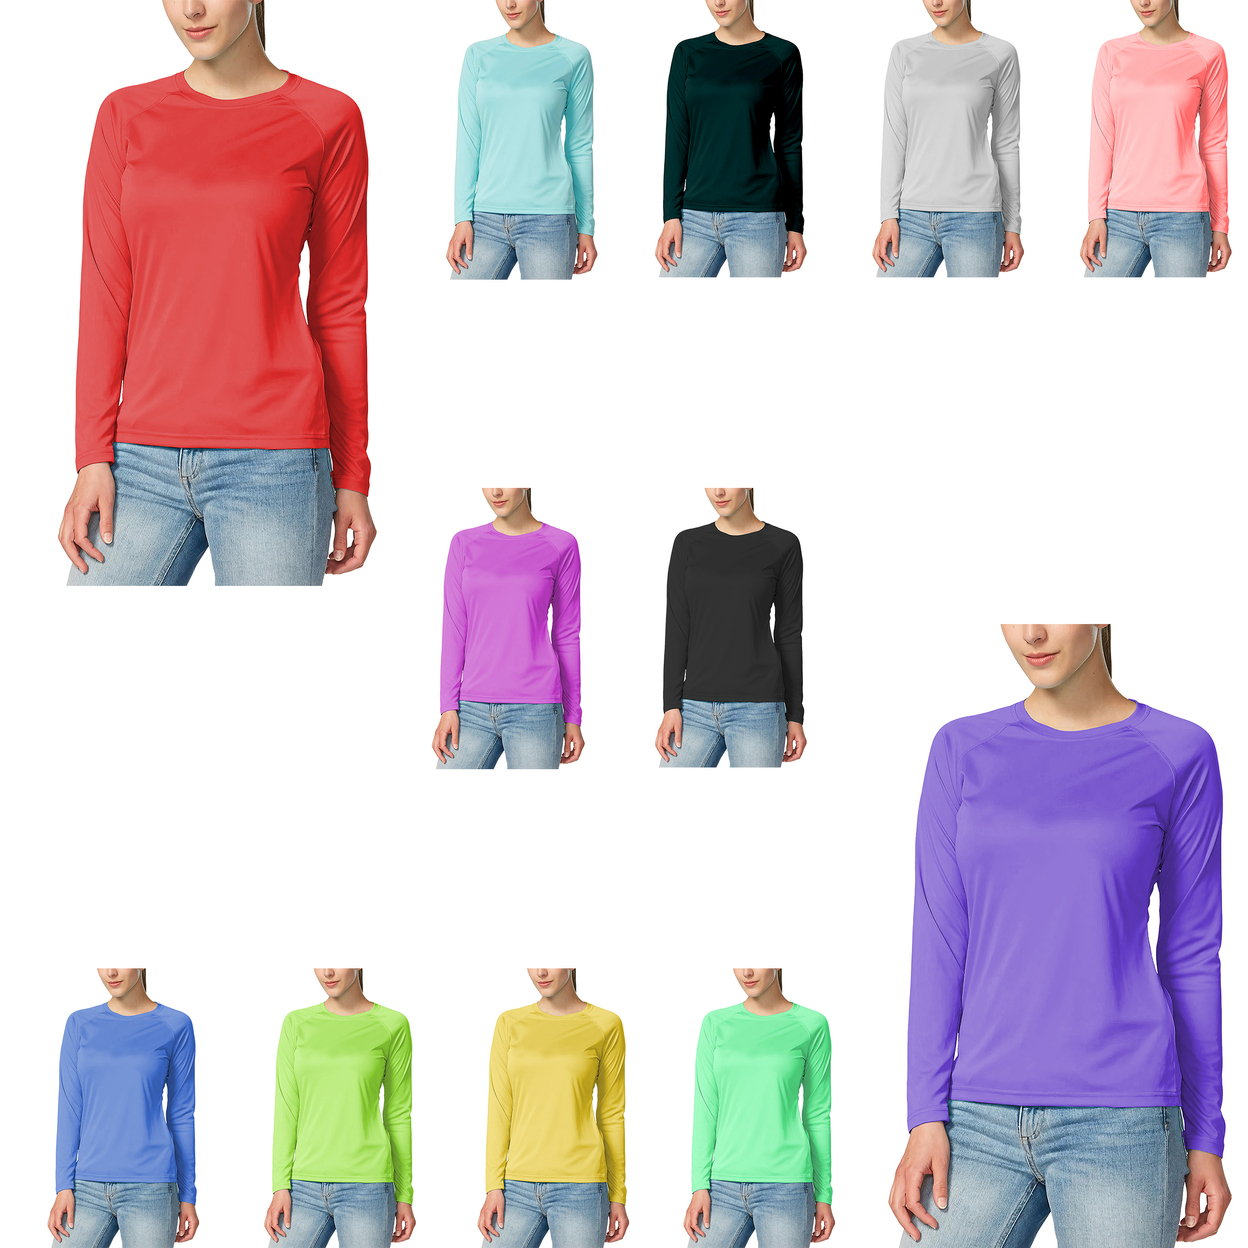 4-Pack: Women's Dri-Fit Moisture-Wicking Breathable Long Sleeve T-Shirt - Large